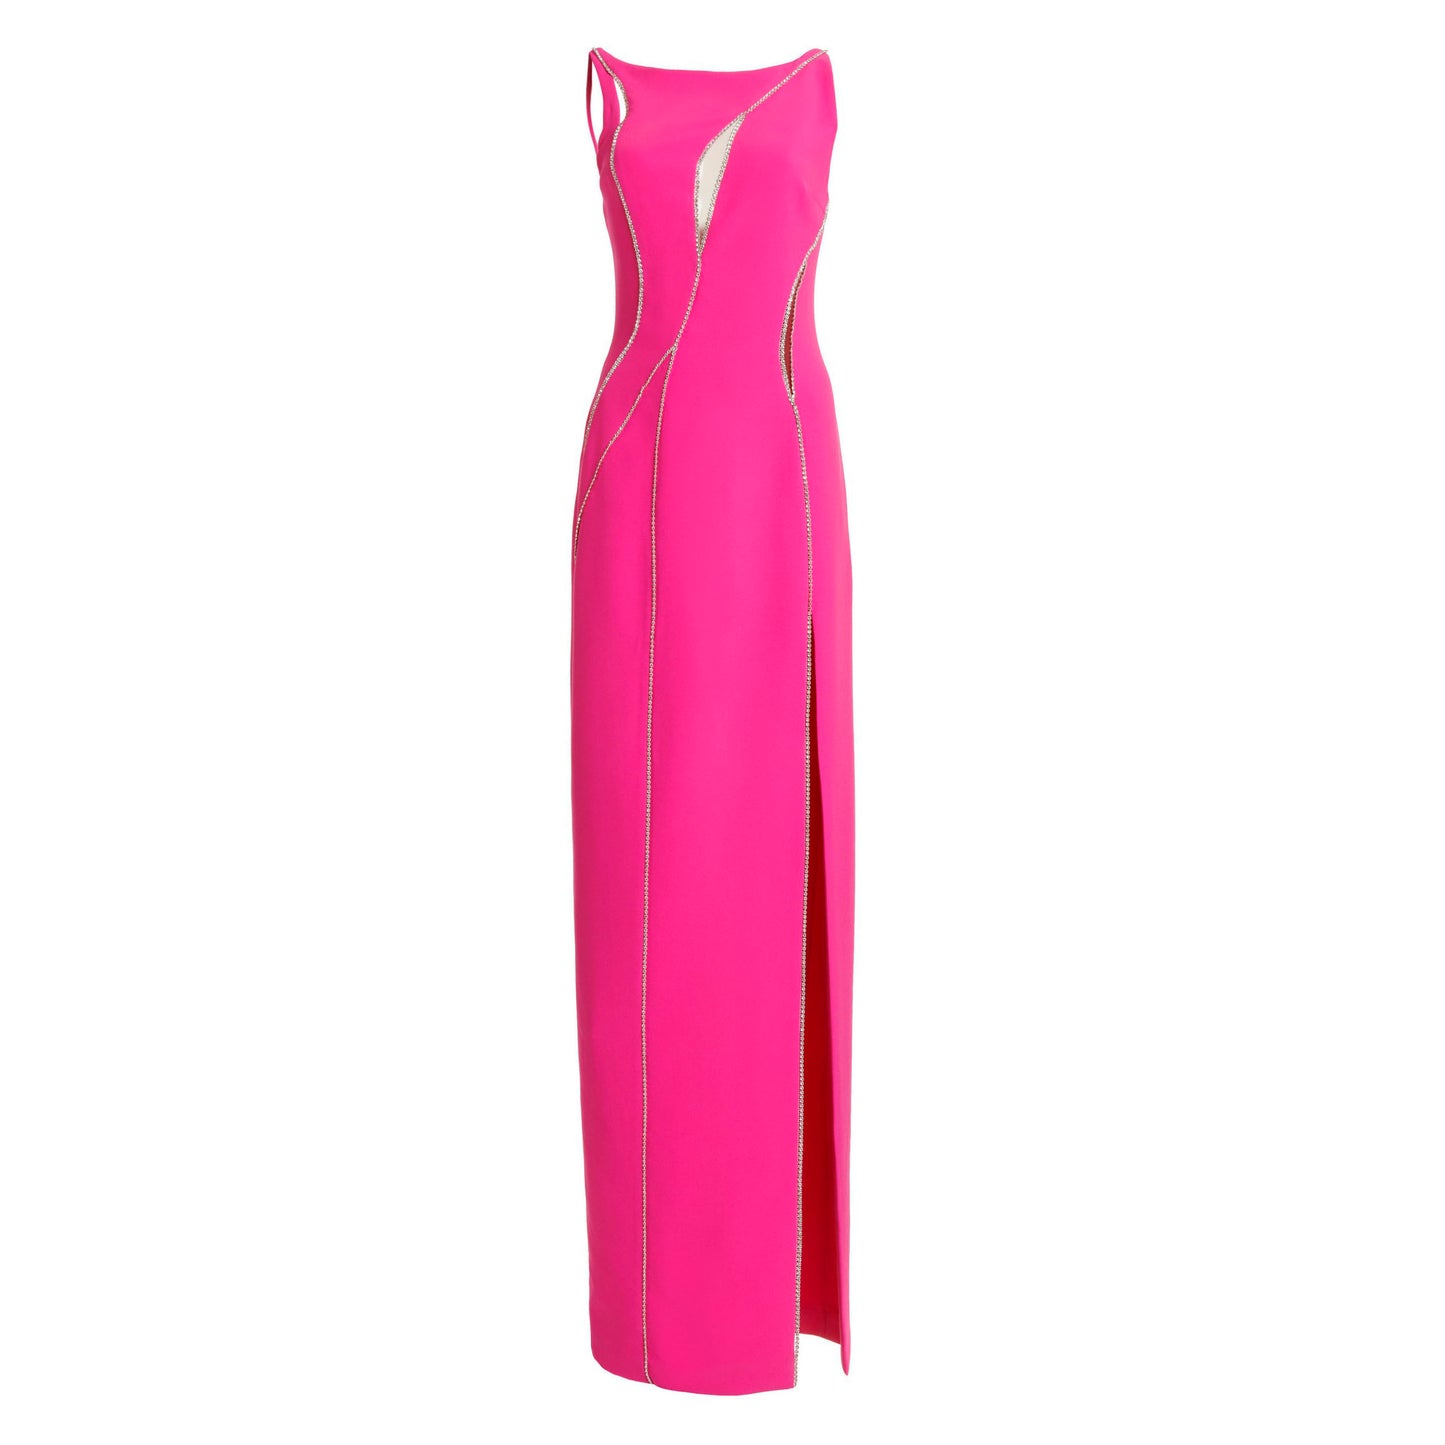 EMERSON PINK CUT OUT CRYSTALS SIDE SLIT